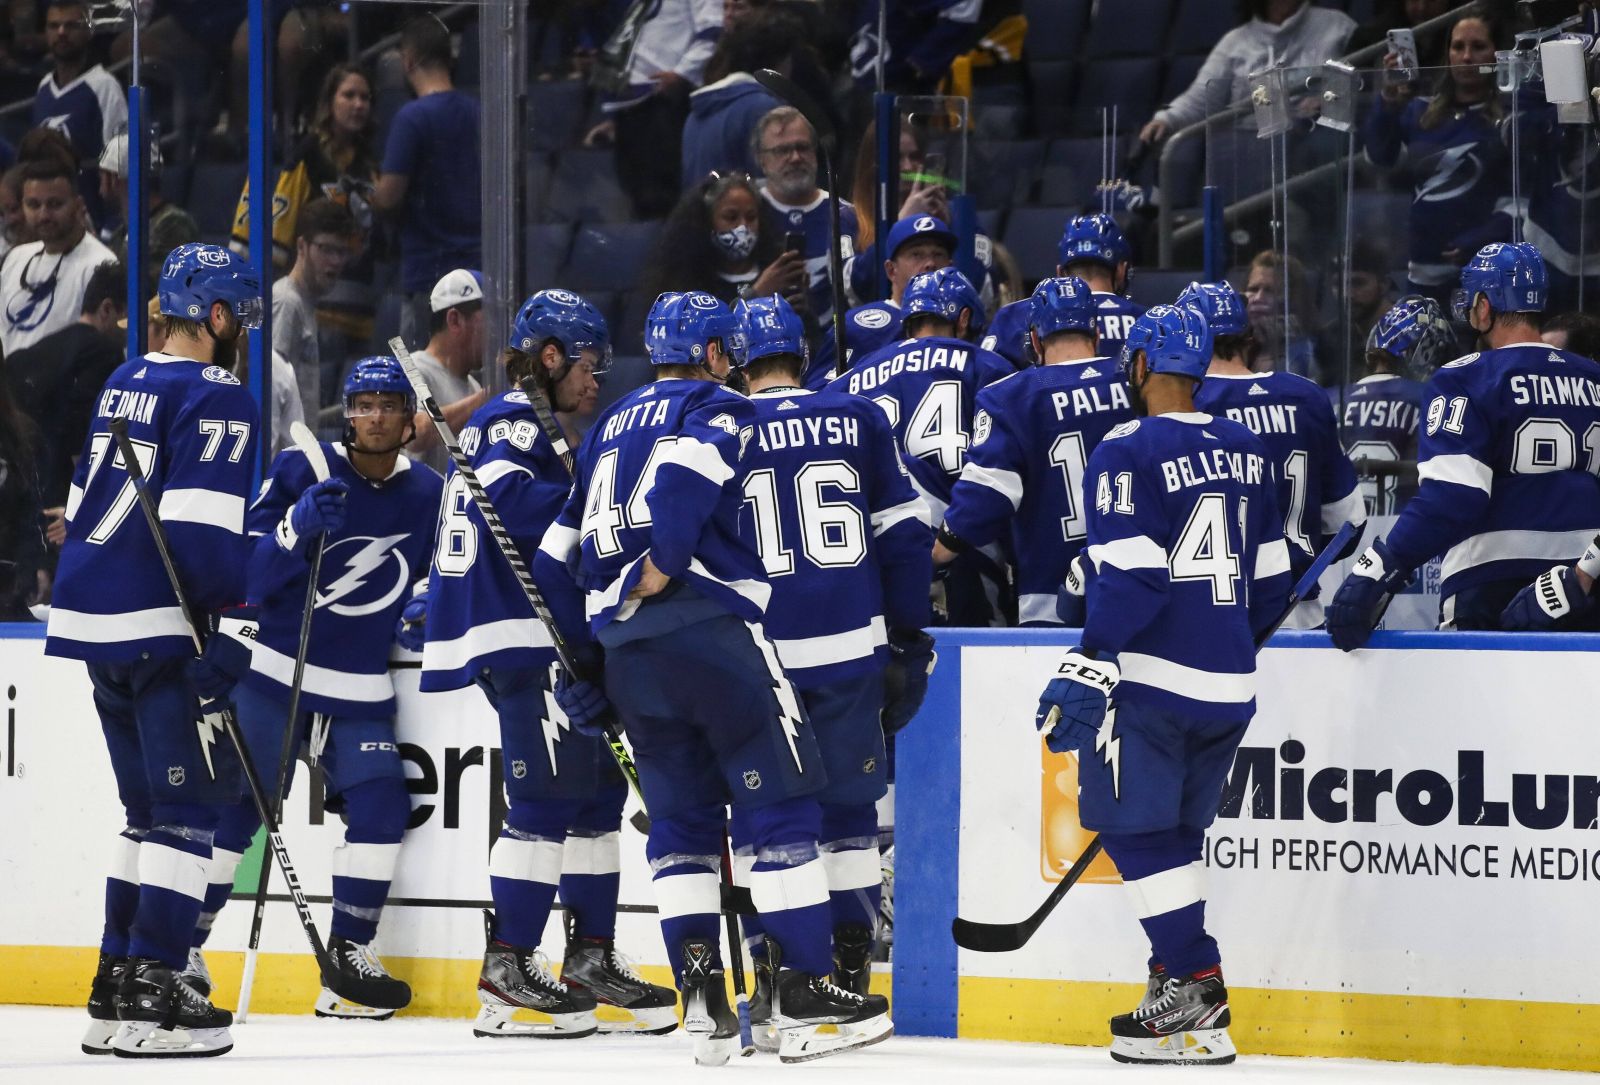 October 12, 2021, Tampa, Florida, USA: Tampa Bay Lightning players skate off the ice after getting beat by the Pittsburgh Penguins with a final score of 6-2 in the NHL, Eishockey Herren, USA season opener at Amalie Arena on Tuesday, Oct. 12, 2021 in Tampa. Tampa USA - ZUMAs70_ 0138411255st Copyright: xDirkxShaddx